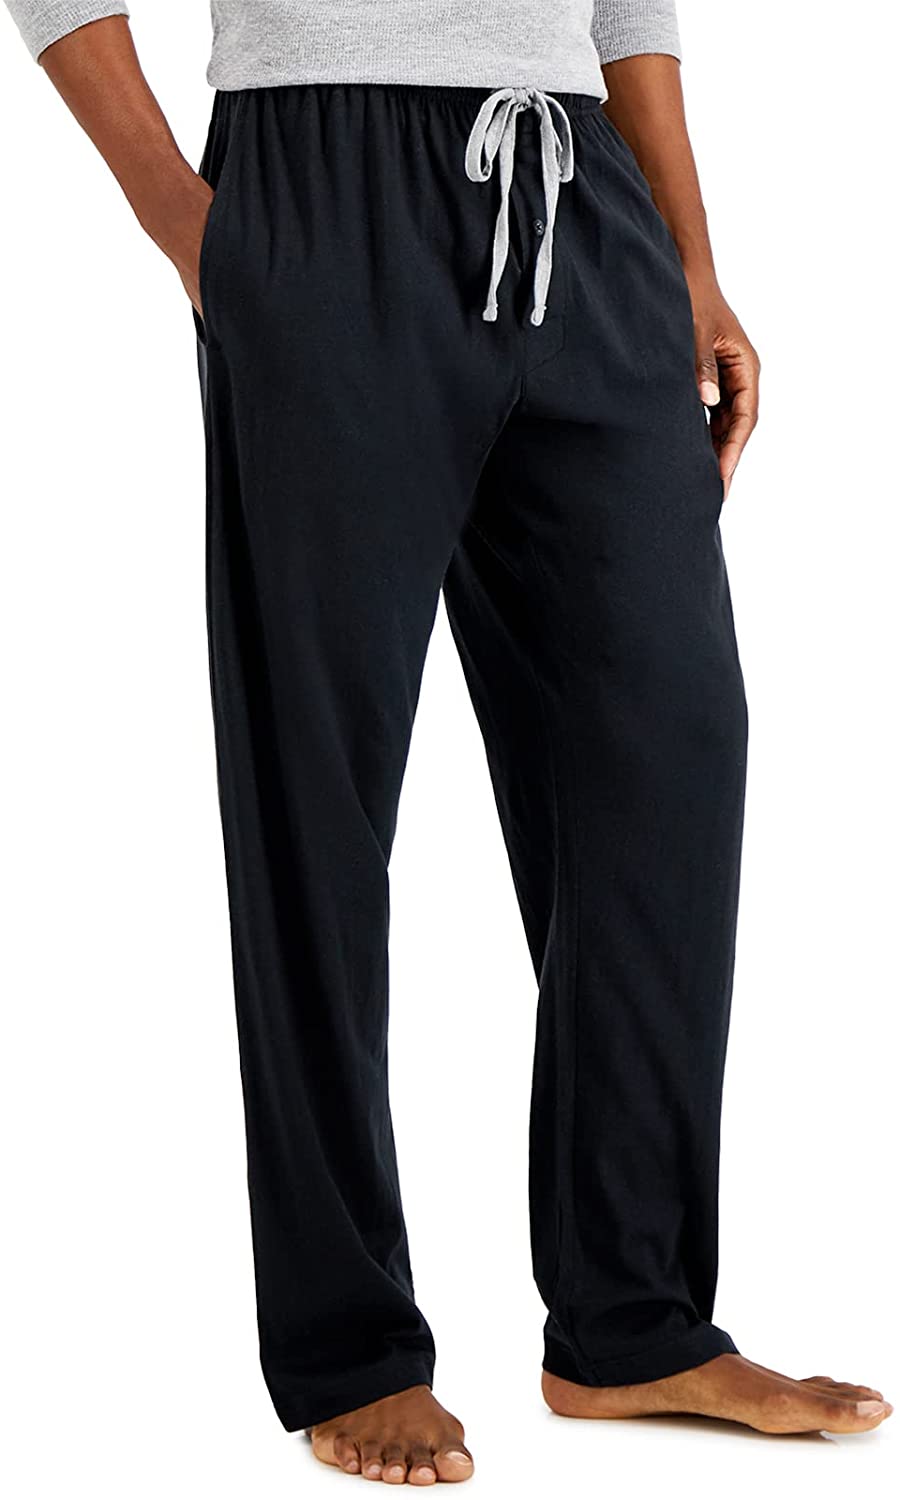 Hanes Men Jersey Pant with ComfortSoft Waistband 01101